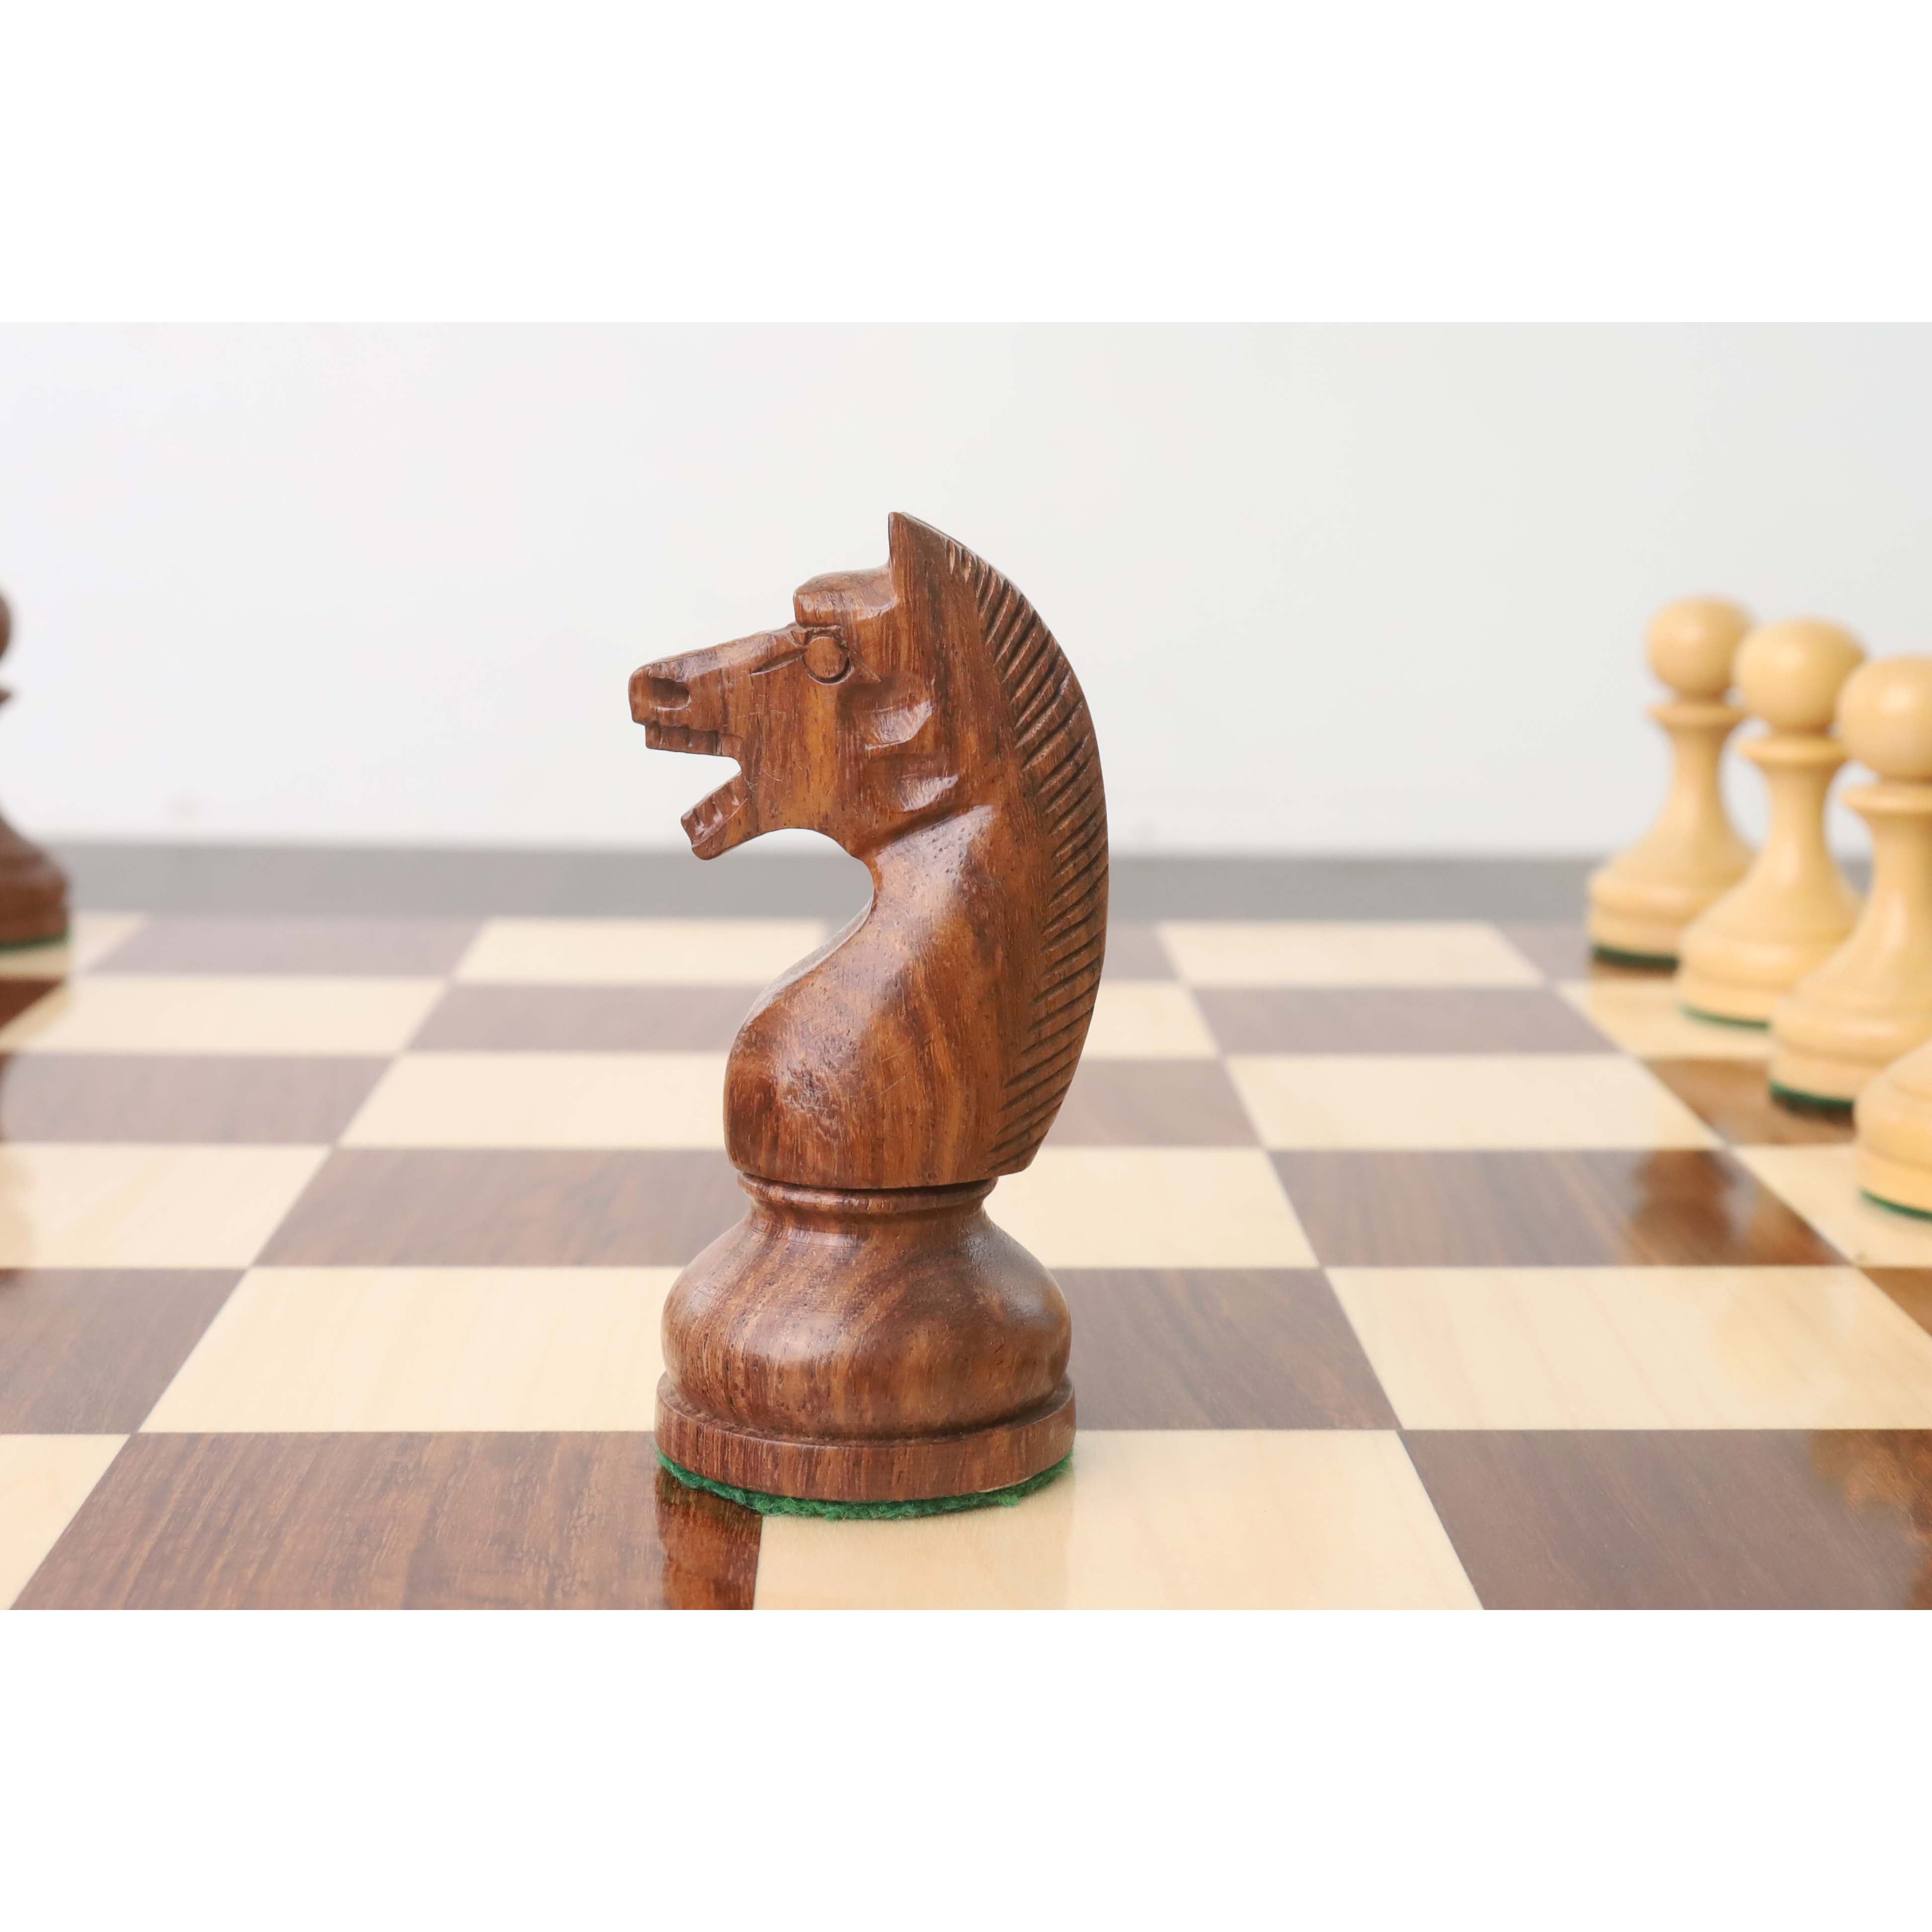 4.5" Soviet Russian 1960's Chess Pieces Only Set-Double Weighted Golden Rosewood